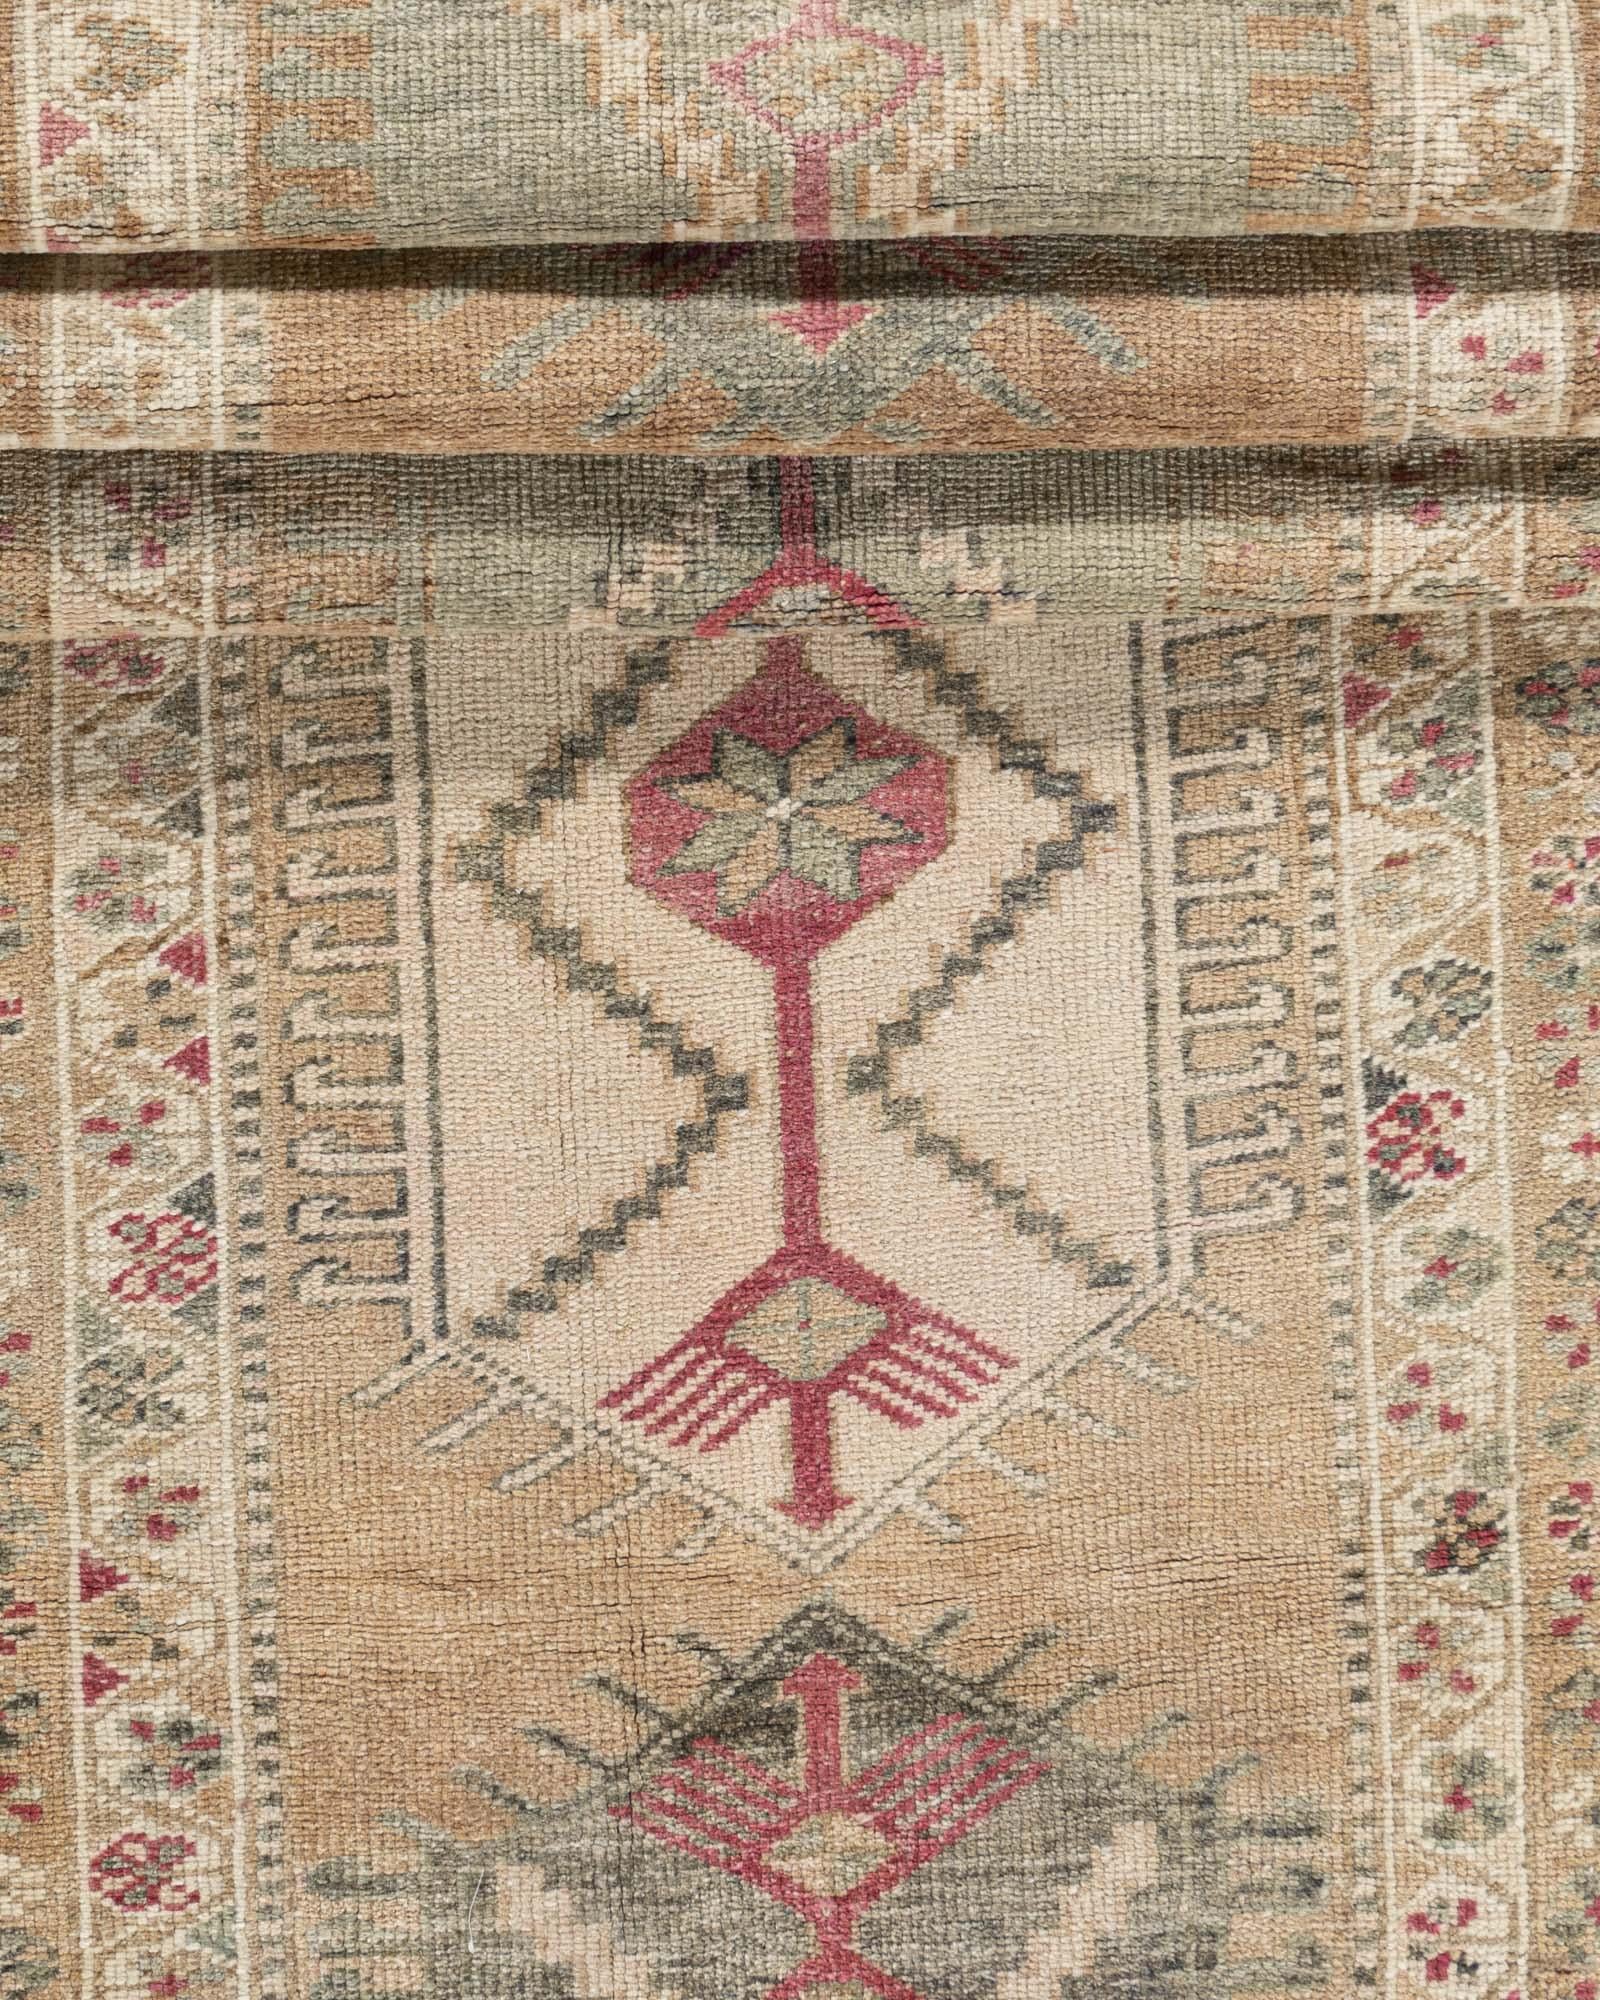 Vintage Turkish Oushak Runner 2'9 X 16'8. This rug has an Abrash which is a natural change in color that occurs when different dyes are used in a batch of wool and gives uniqueness an extra beauty to the rug. Hand-woven in Turkey where rug weaving